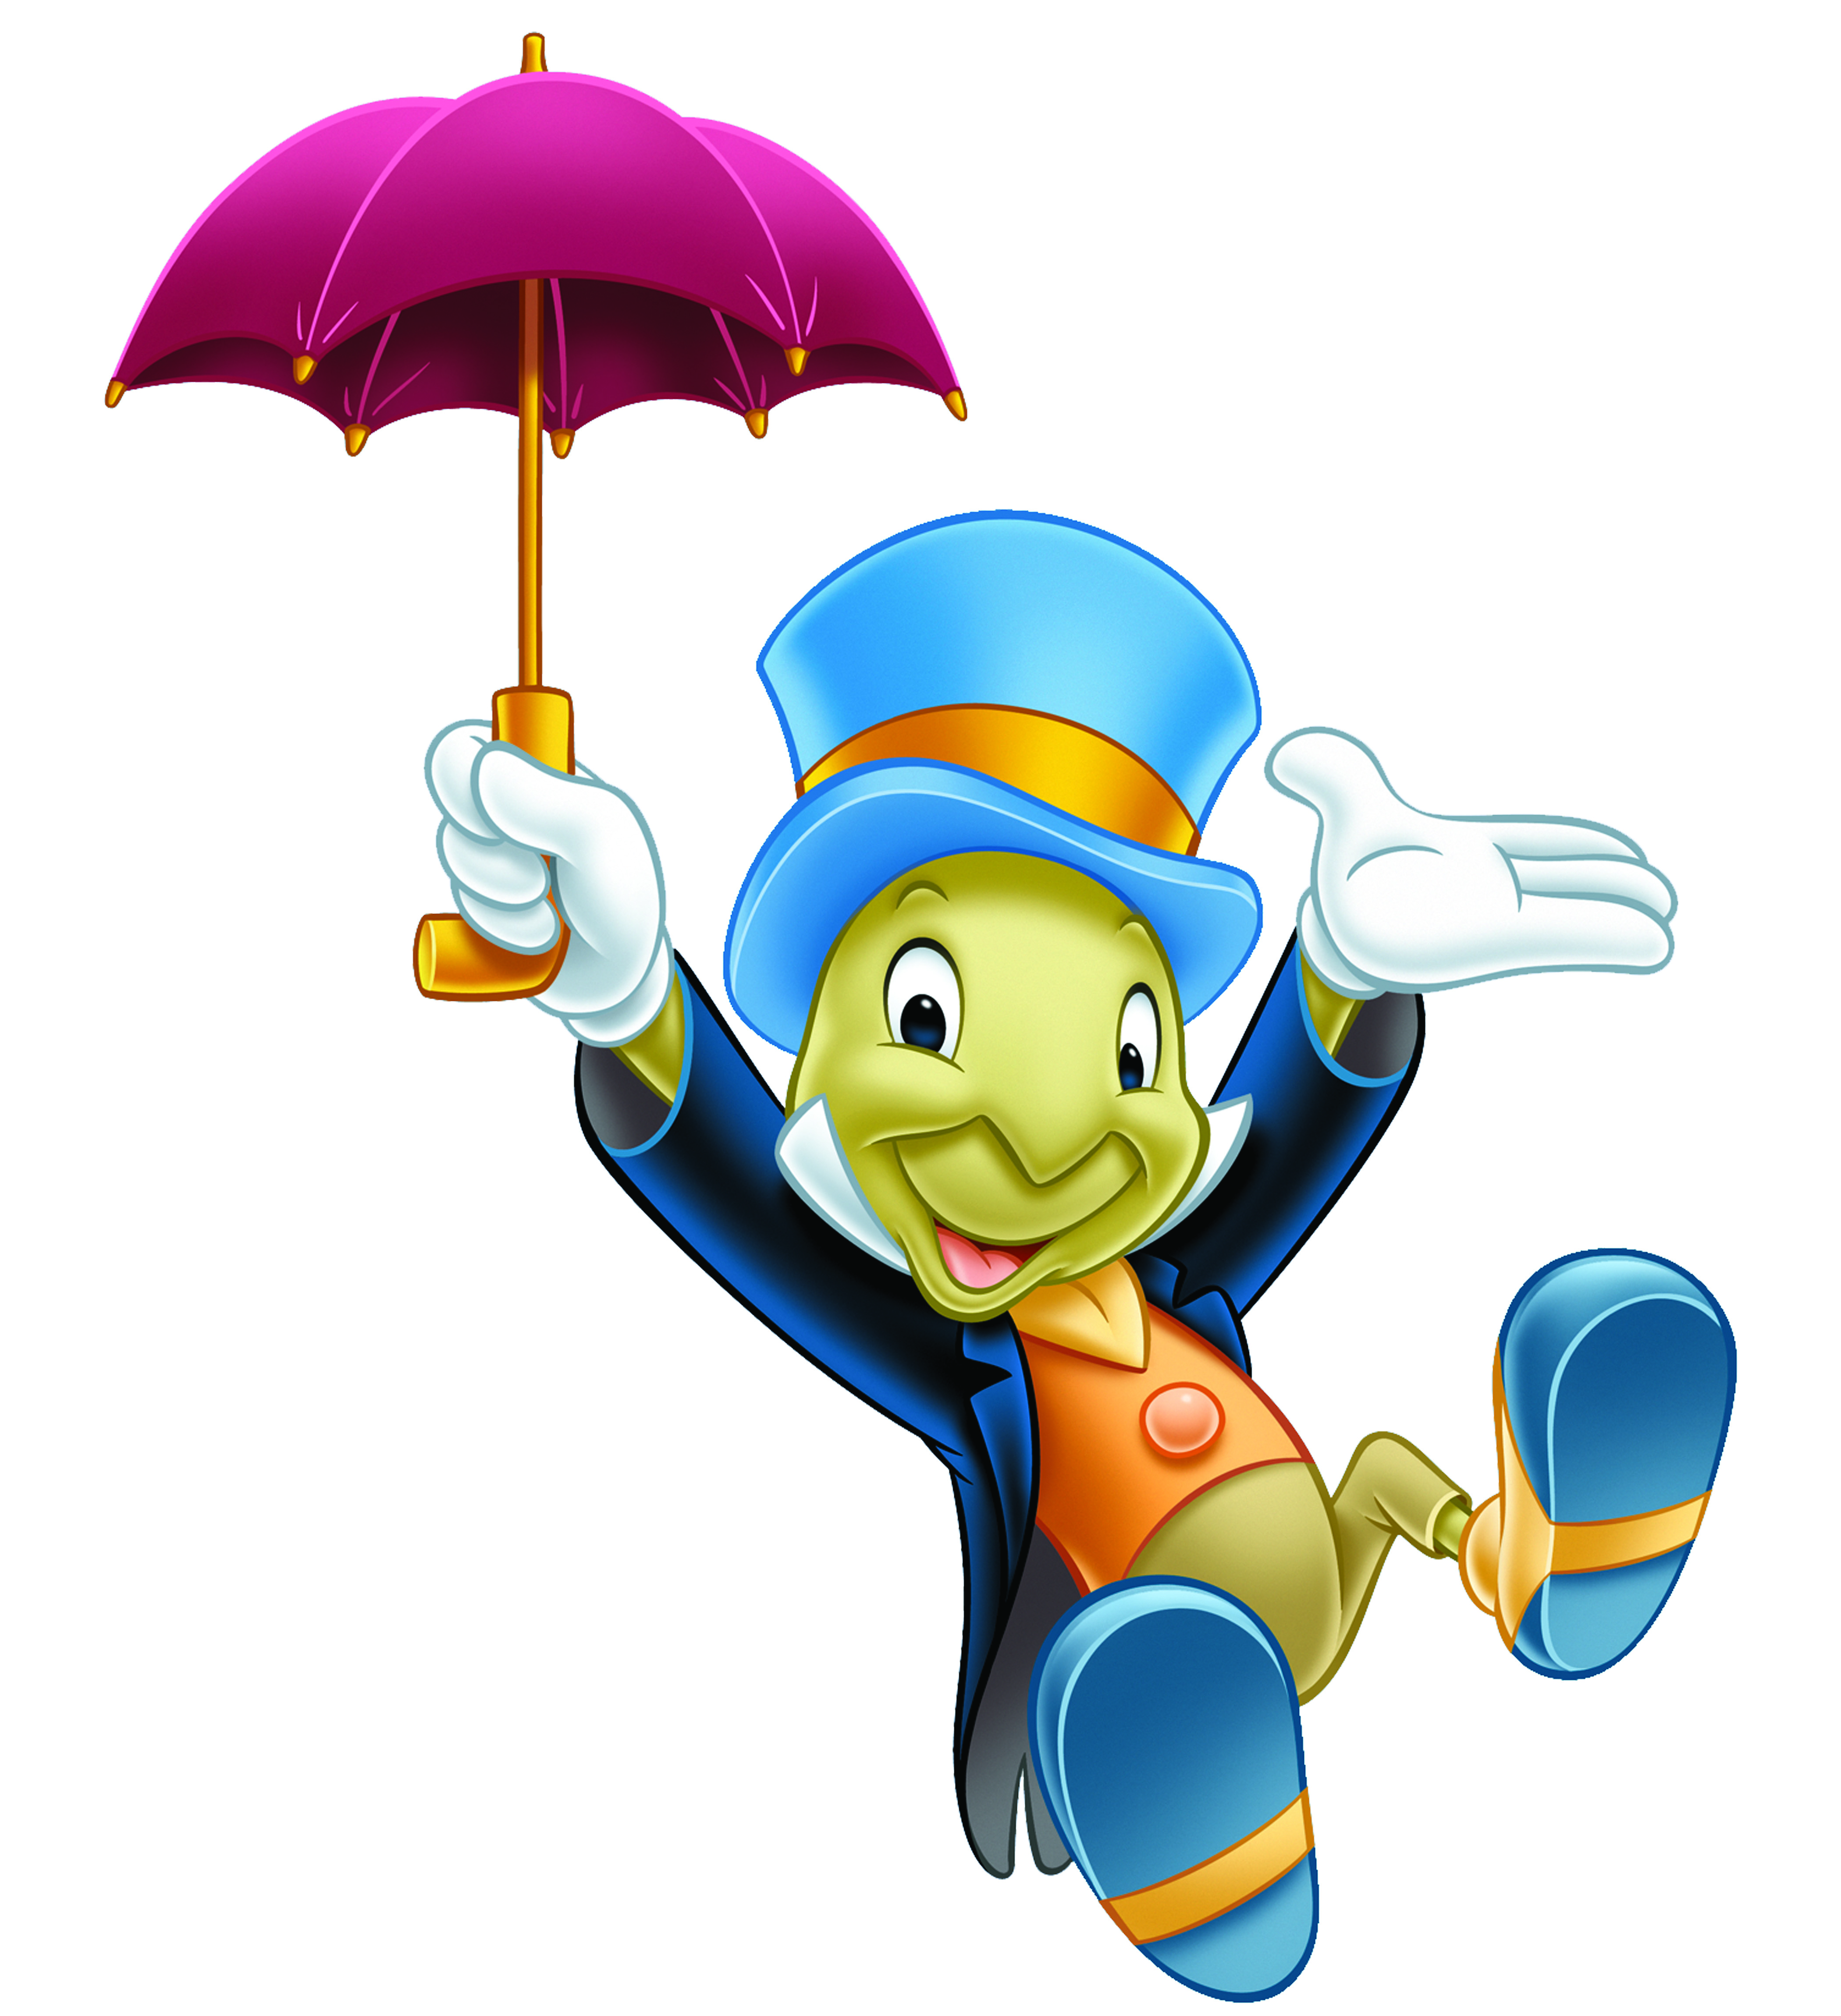 10 Things You Didn't Know About Jiminy Cricket - Celebrations Press